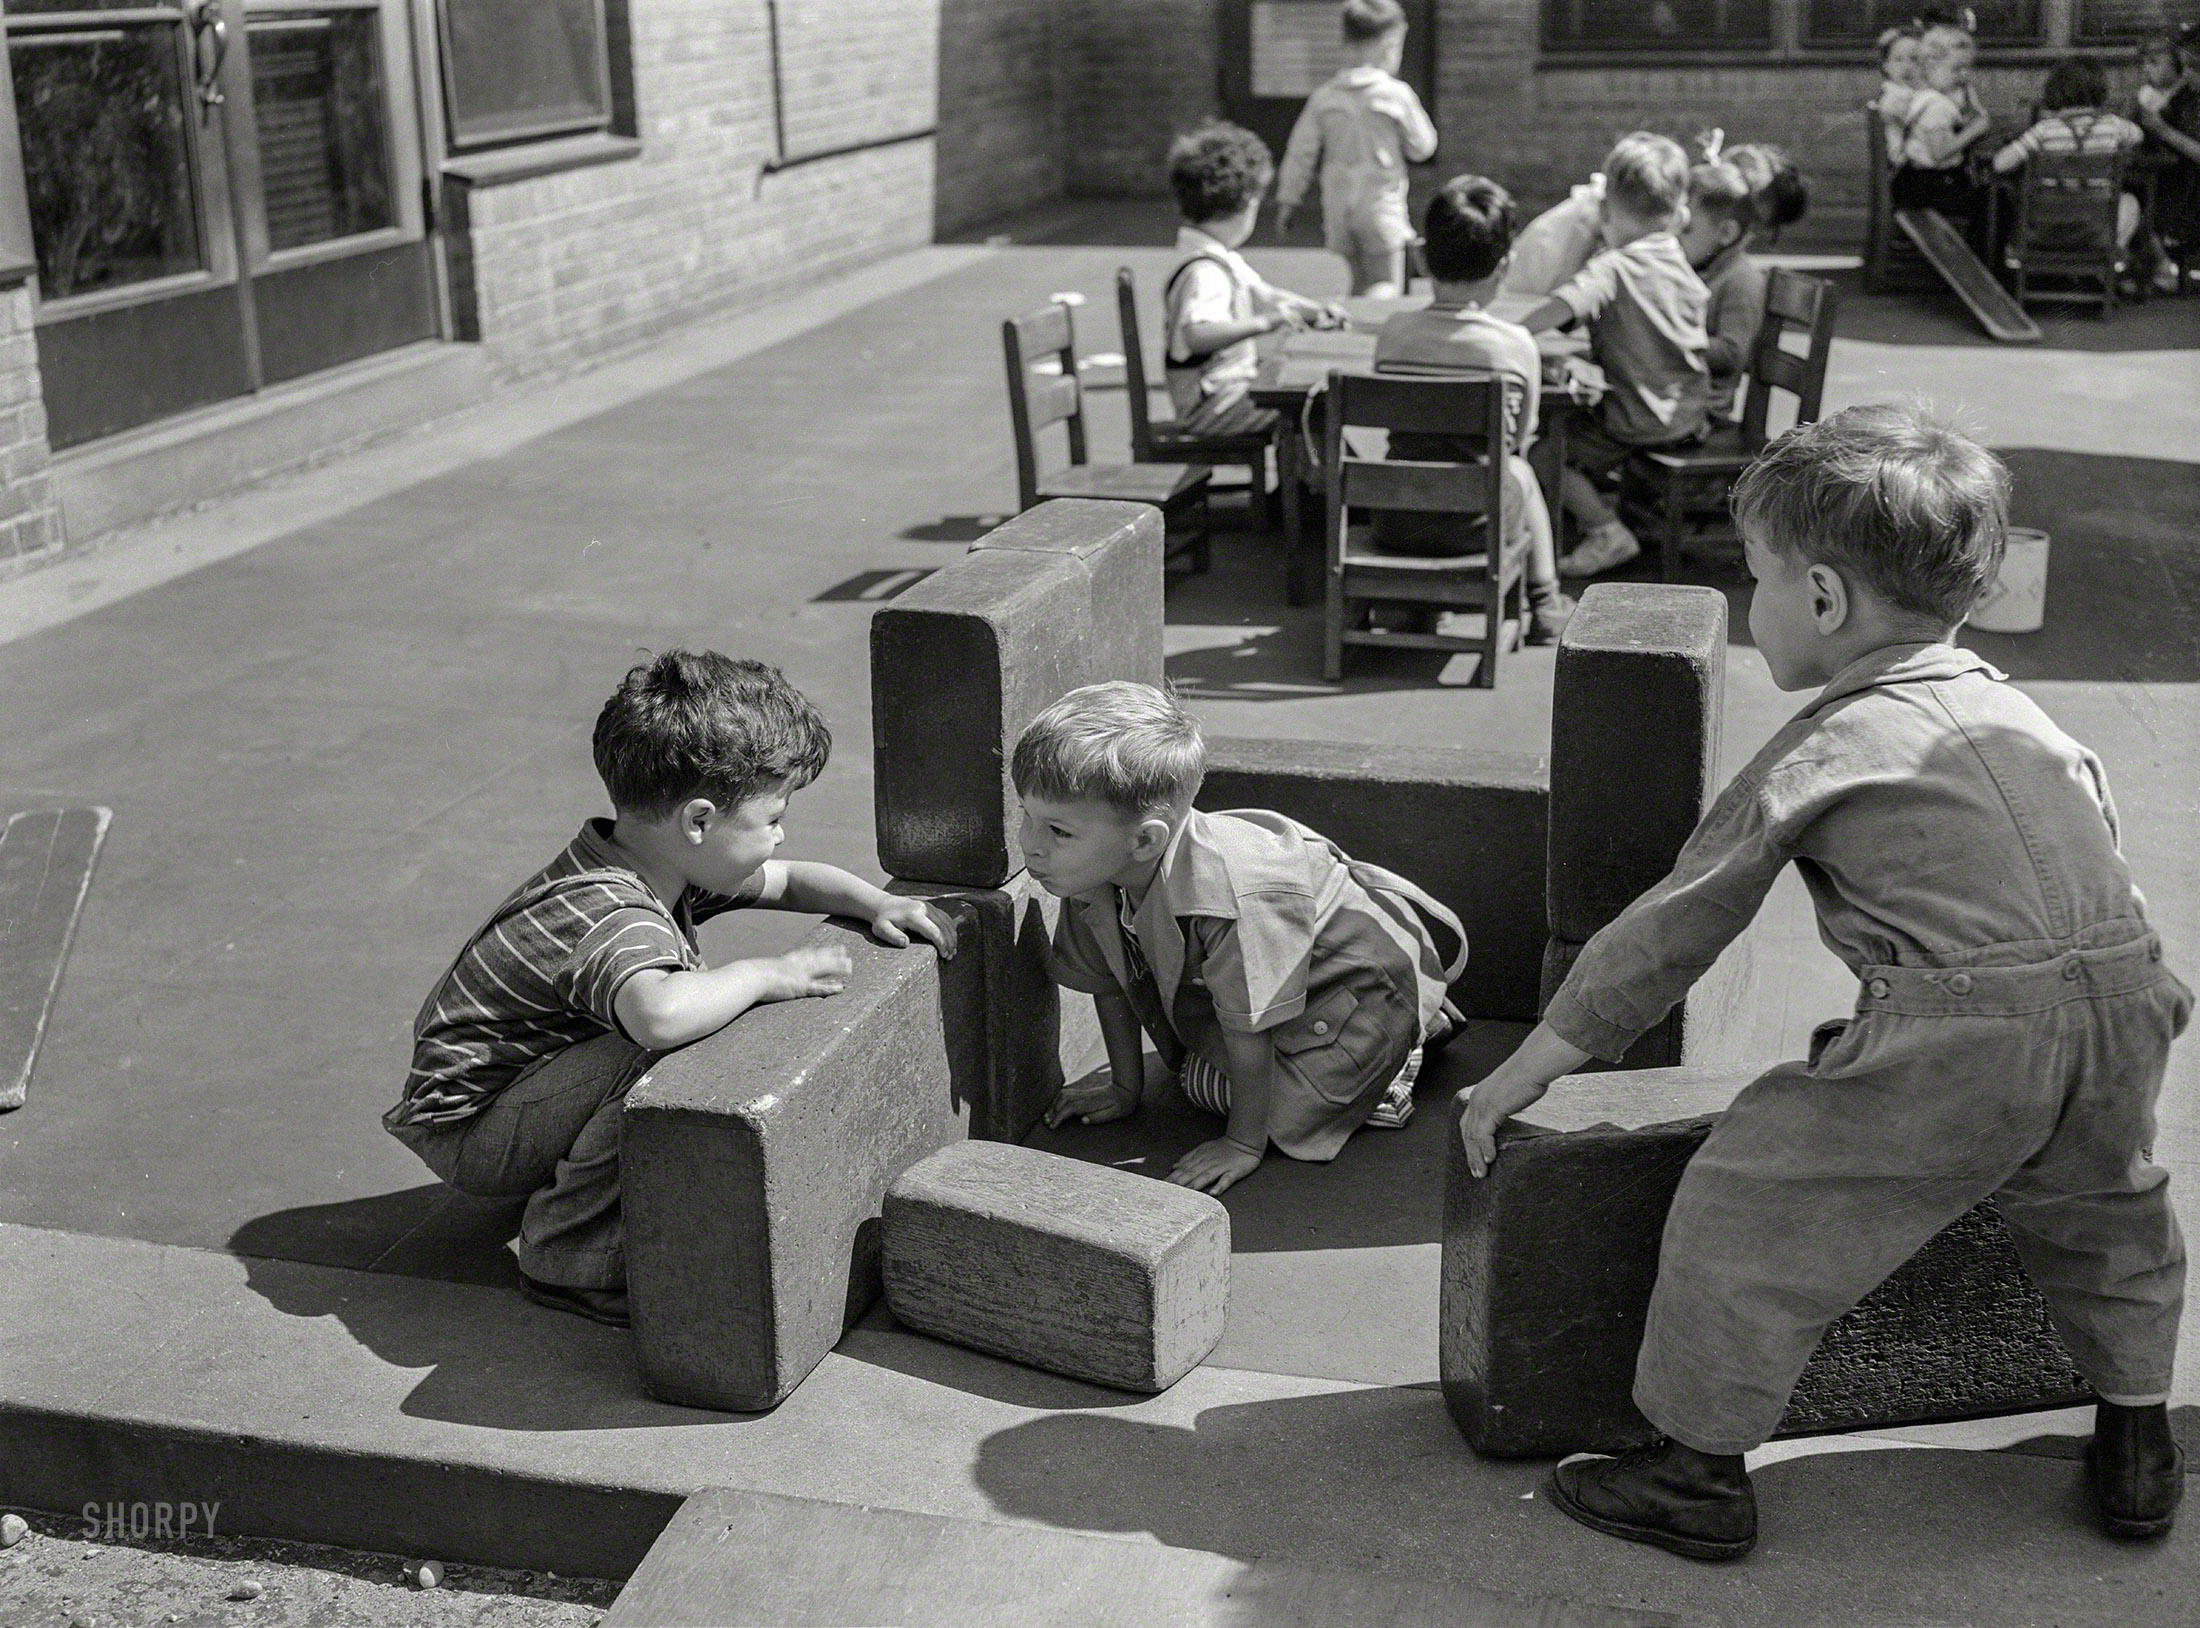 June 1942. "Queens, New York. Nursery school at the Queensbridge housing project. Children playing with blocks." Medium format negative by Arthur Rothstein for the Farm Security Administration. View full size.